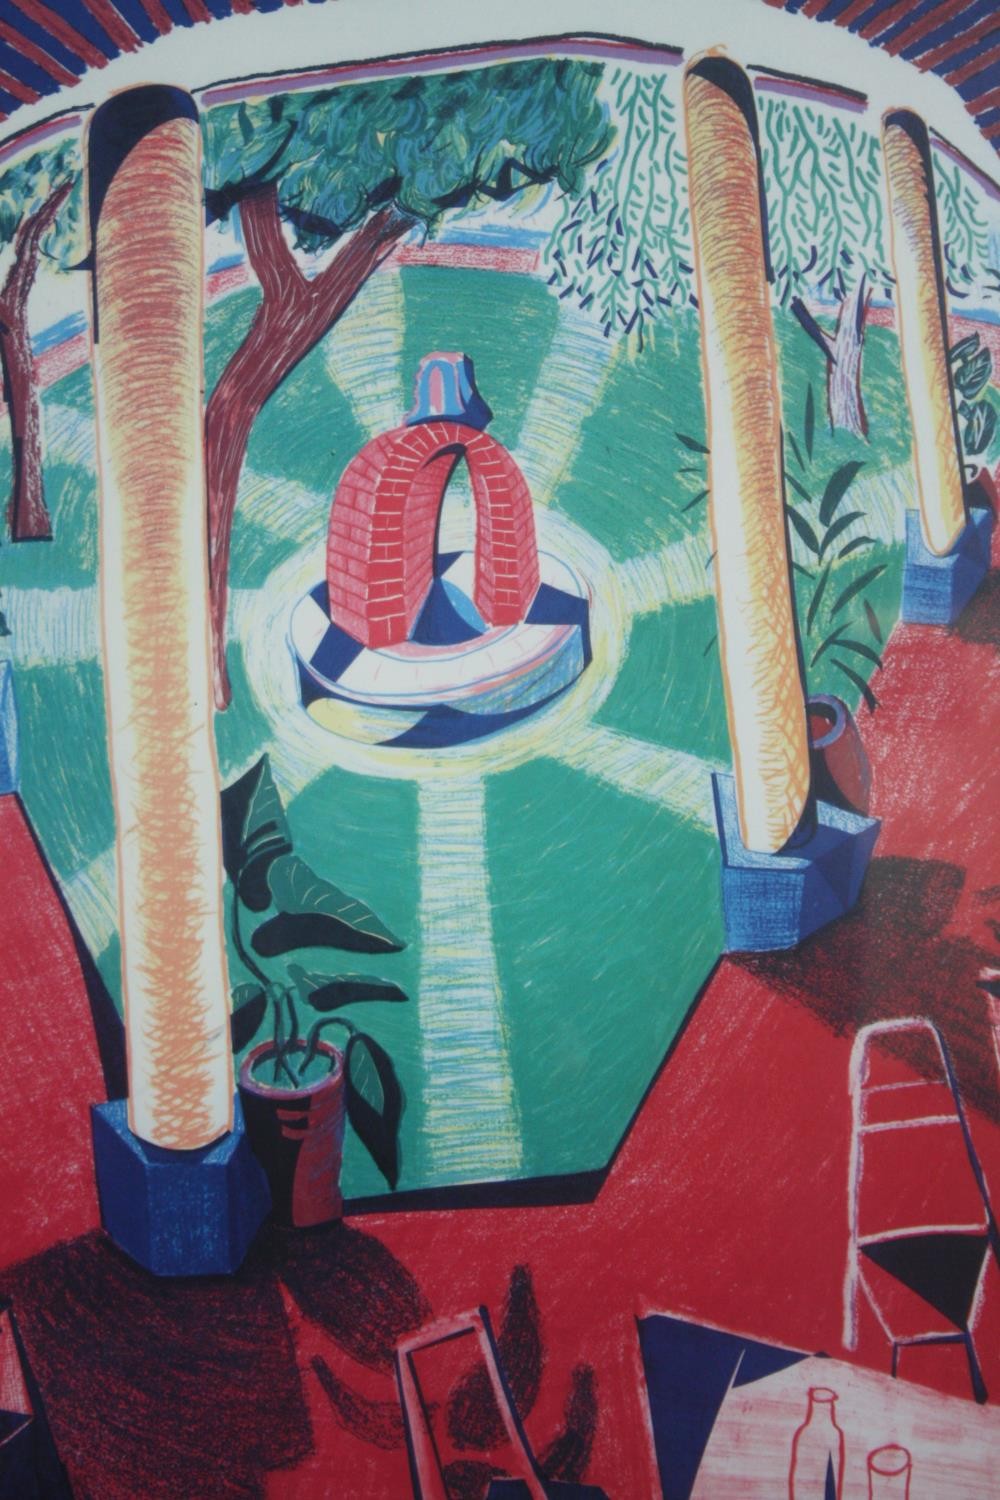 David Hockney. Exhibition published. Printed 1986 by the Tate Gallery for the 'Moving Focus Prints - Image 2 of 3